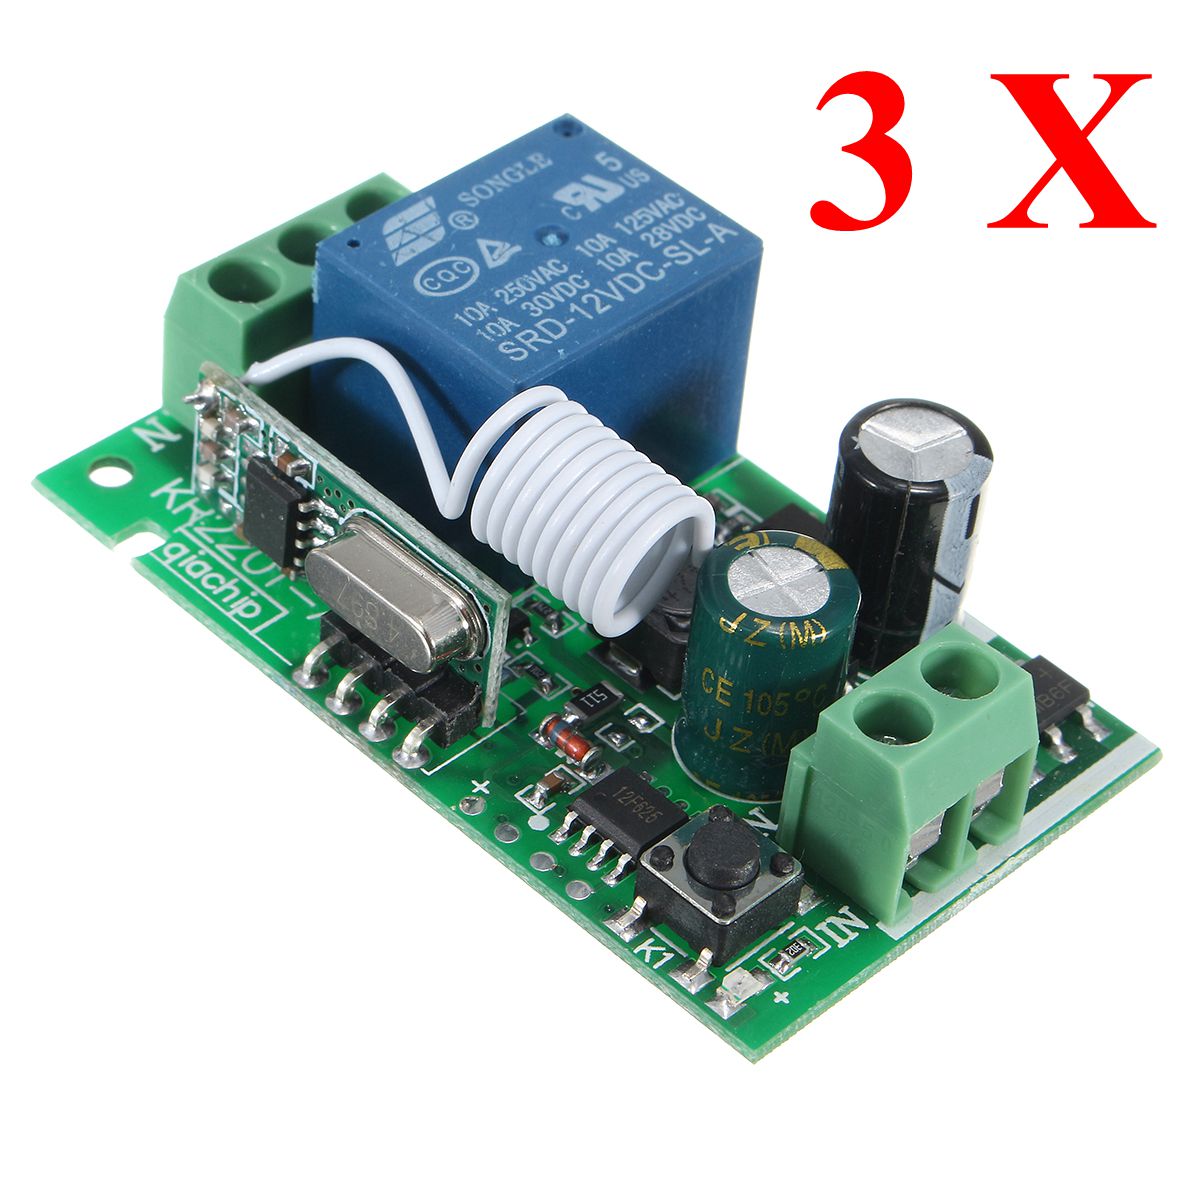 3PCS-315MHz-220V-10A-1CH-Channel-Wireless-Relay-Remote-Control-Switch-Receiver-1588611